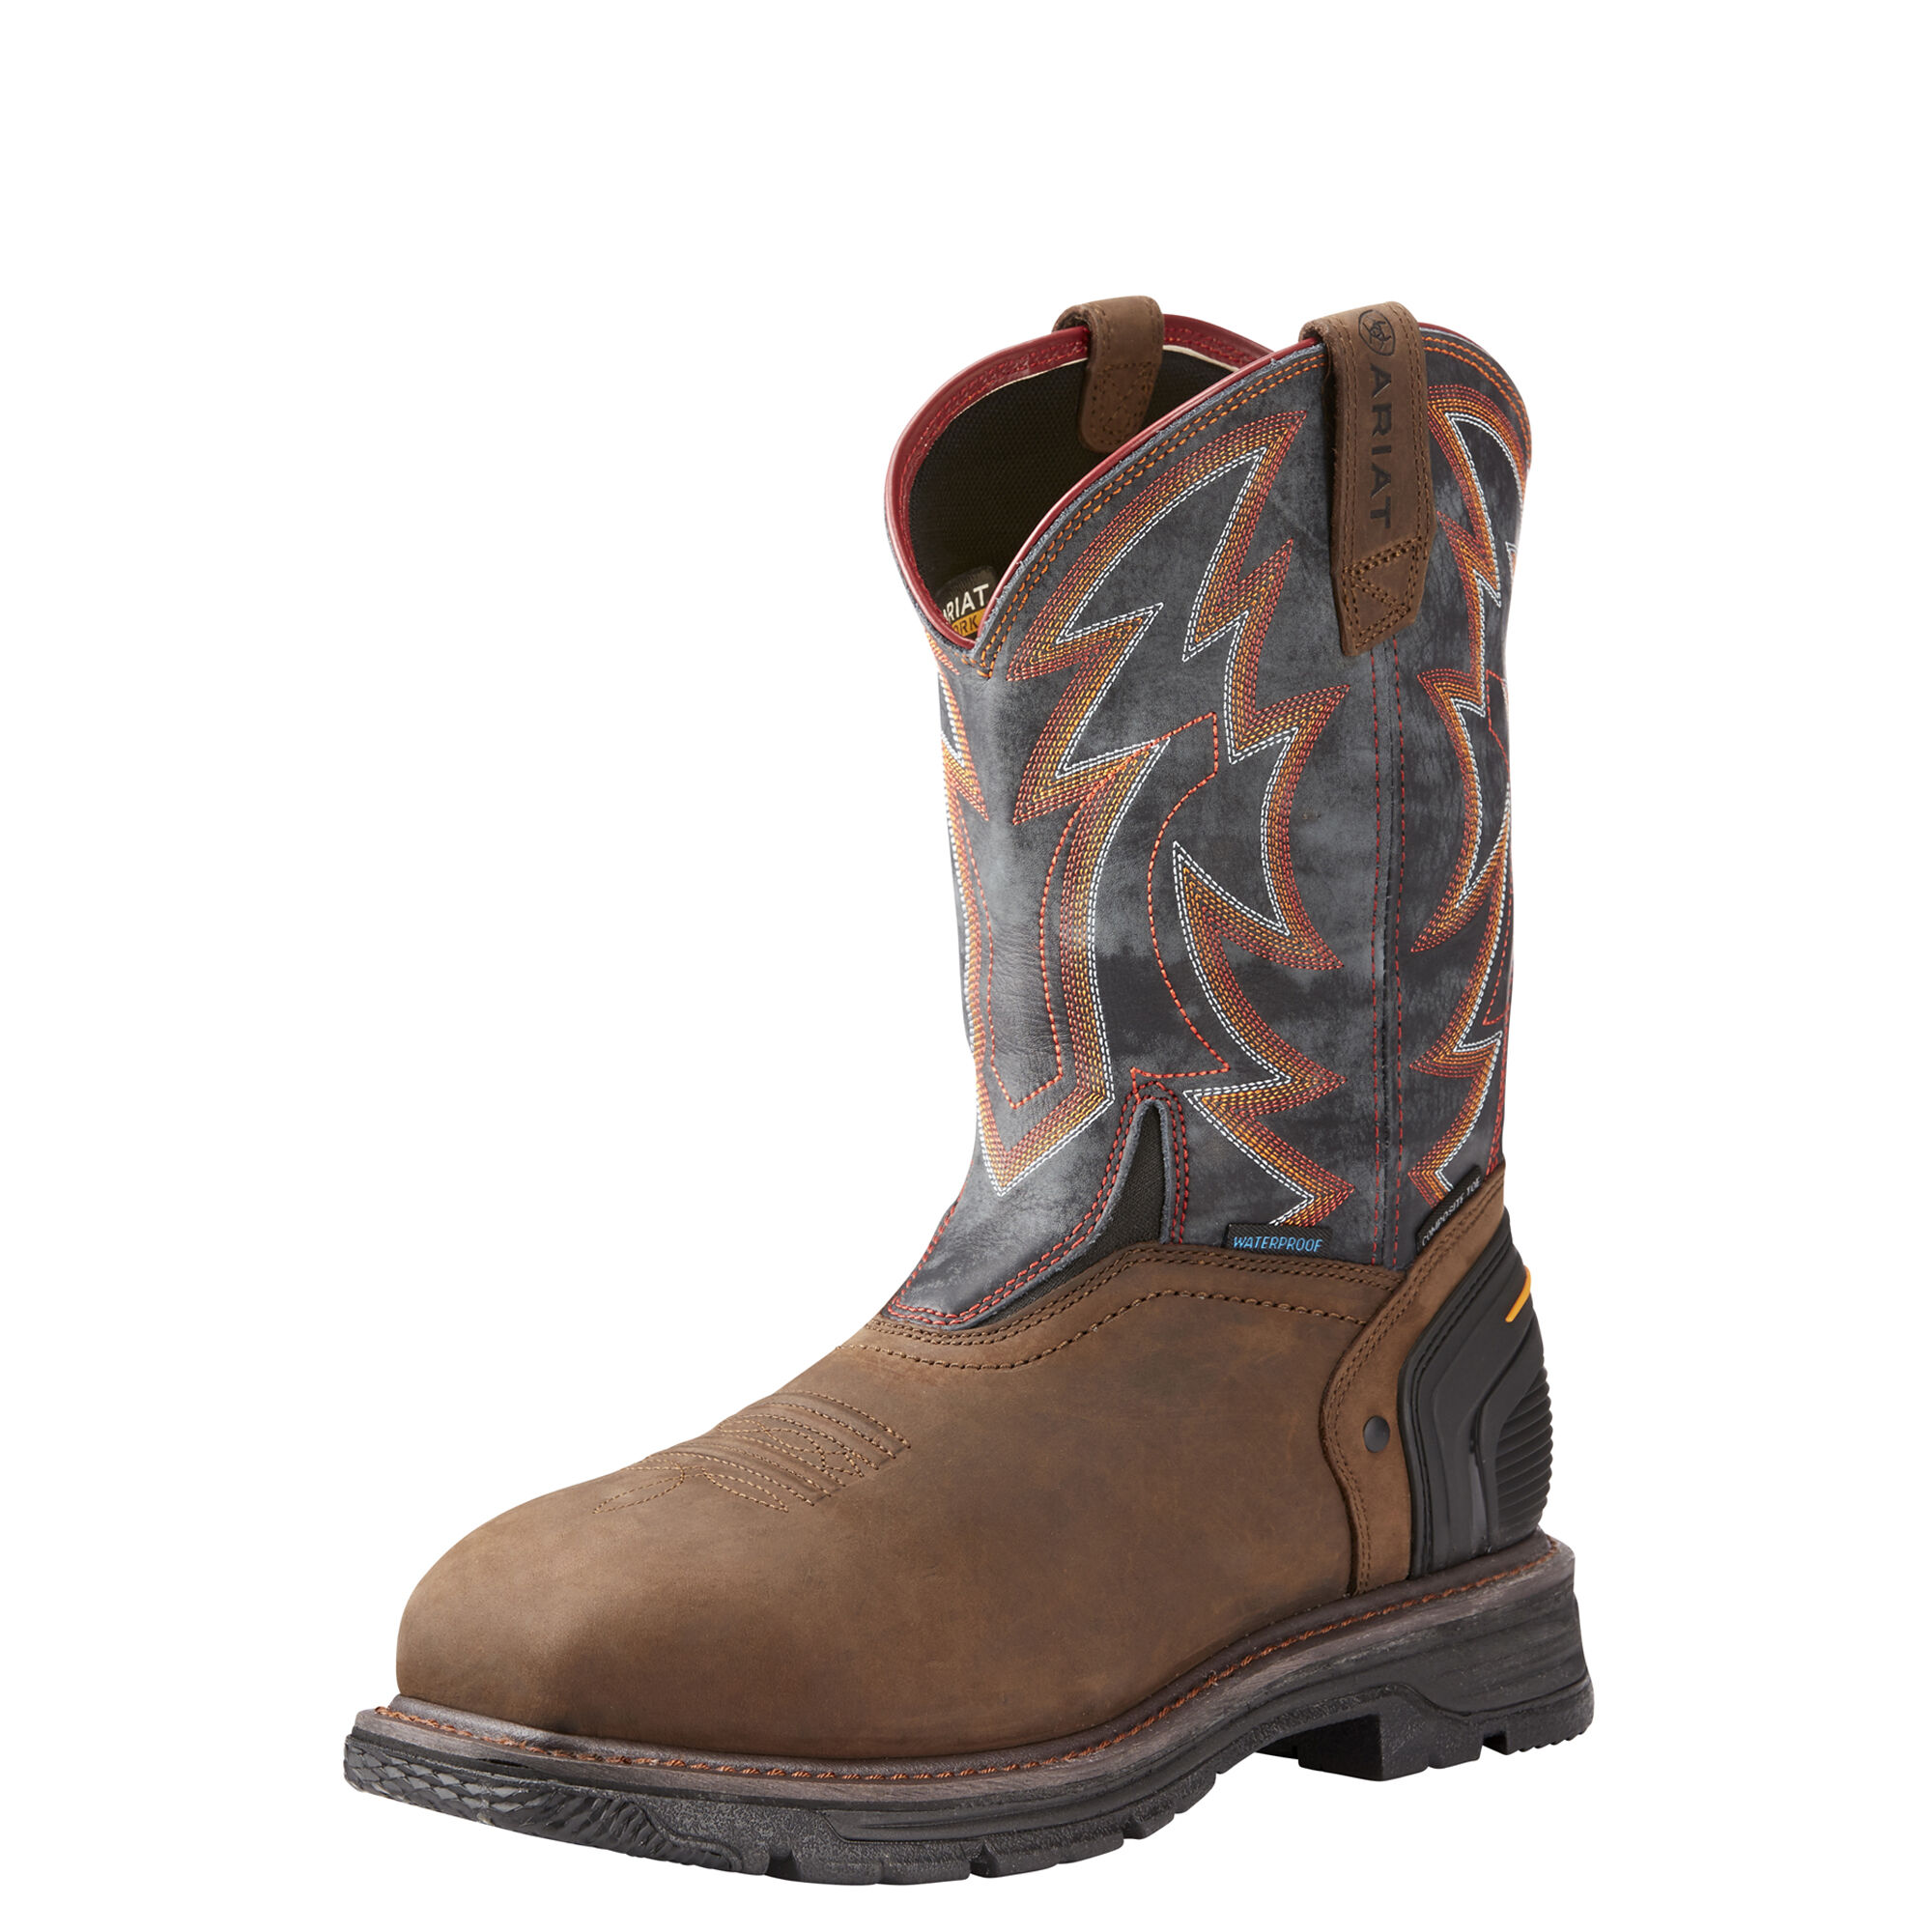 Men's Work Boots Clearance | Ariat